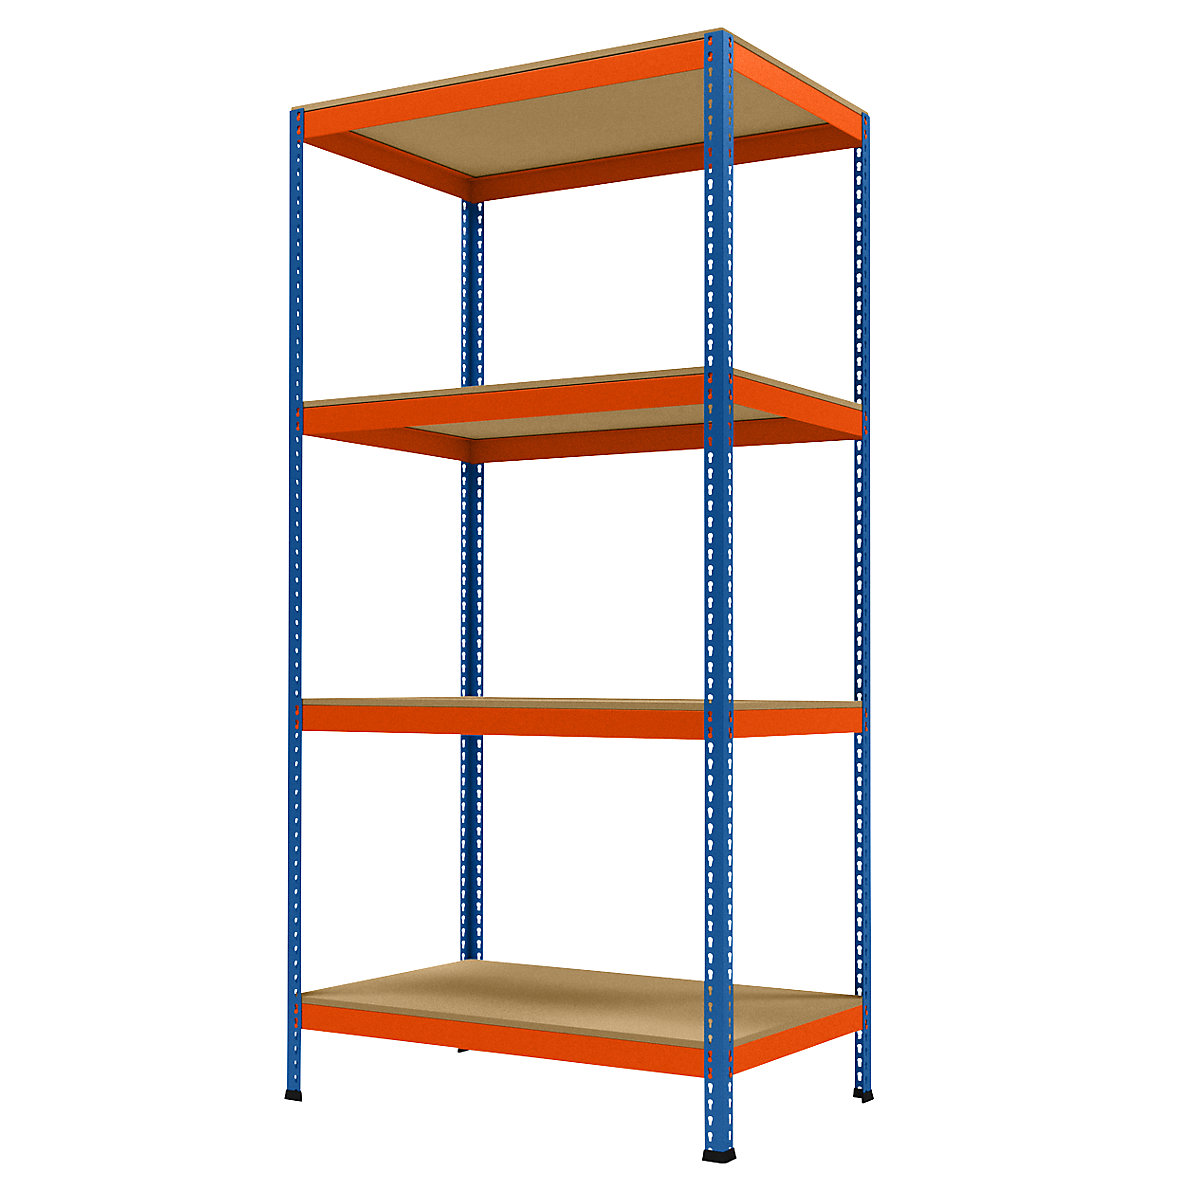 Wide span heavy duty shelving, height 2438 mm, overall depth 773 mm, width 1231 mm